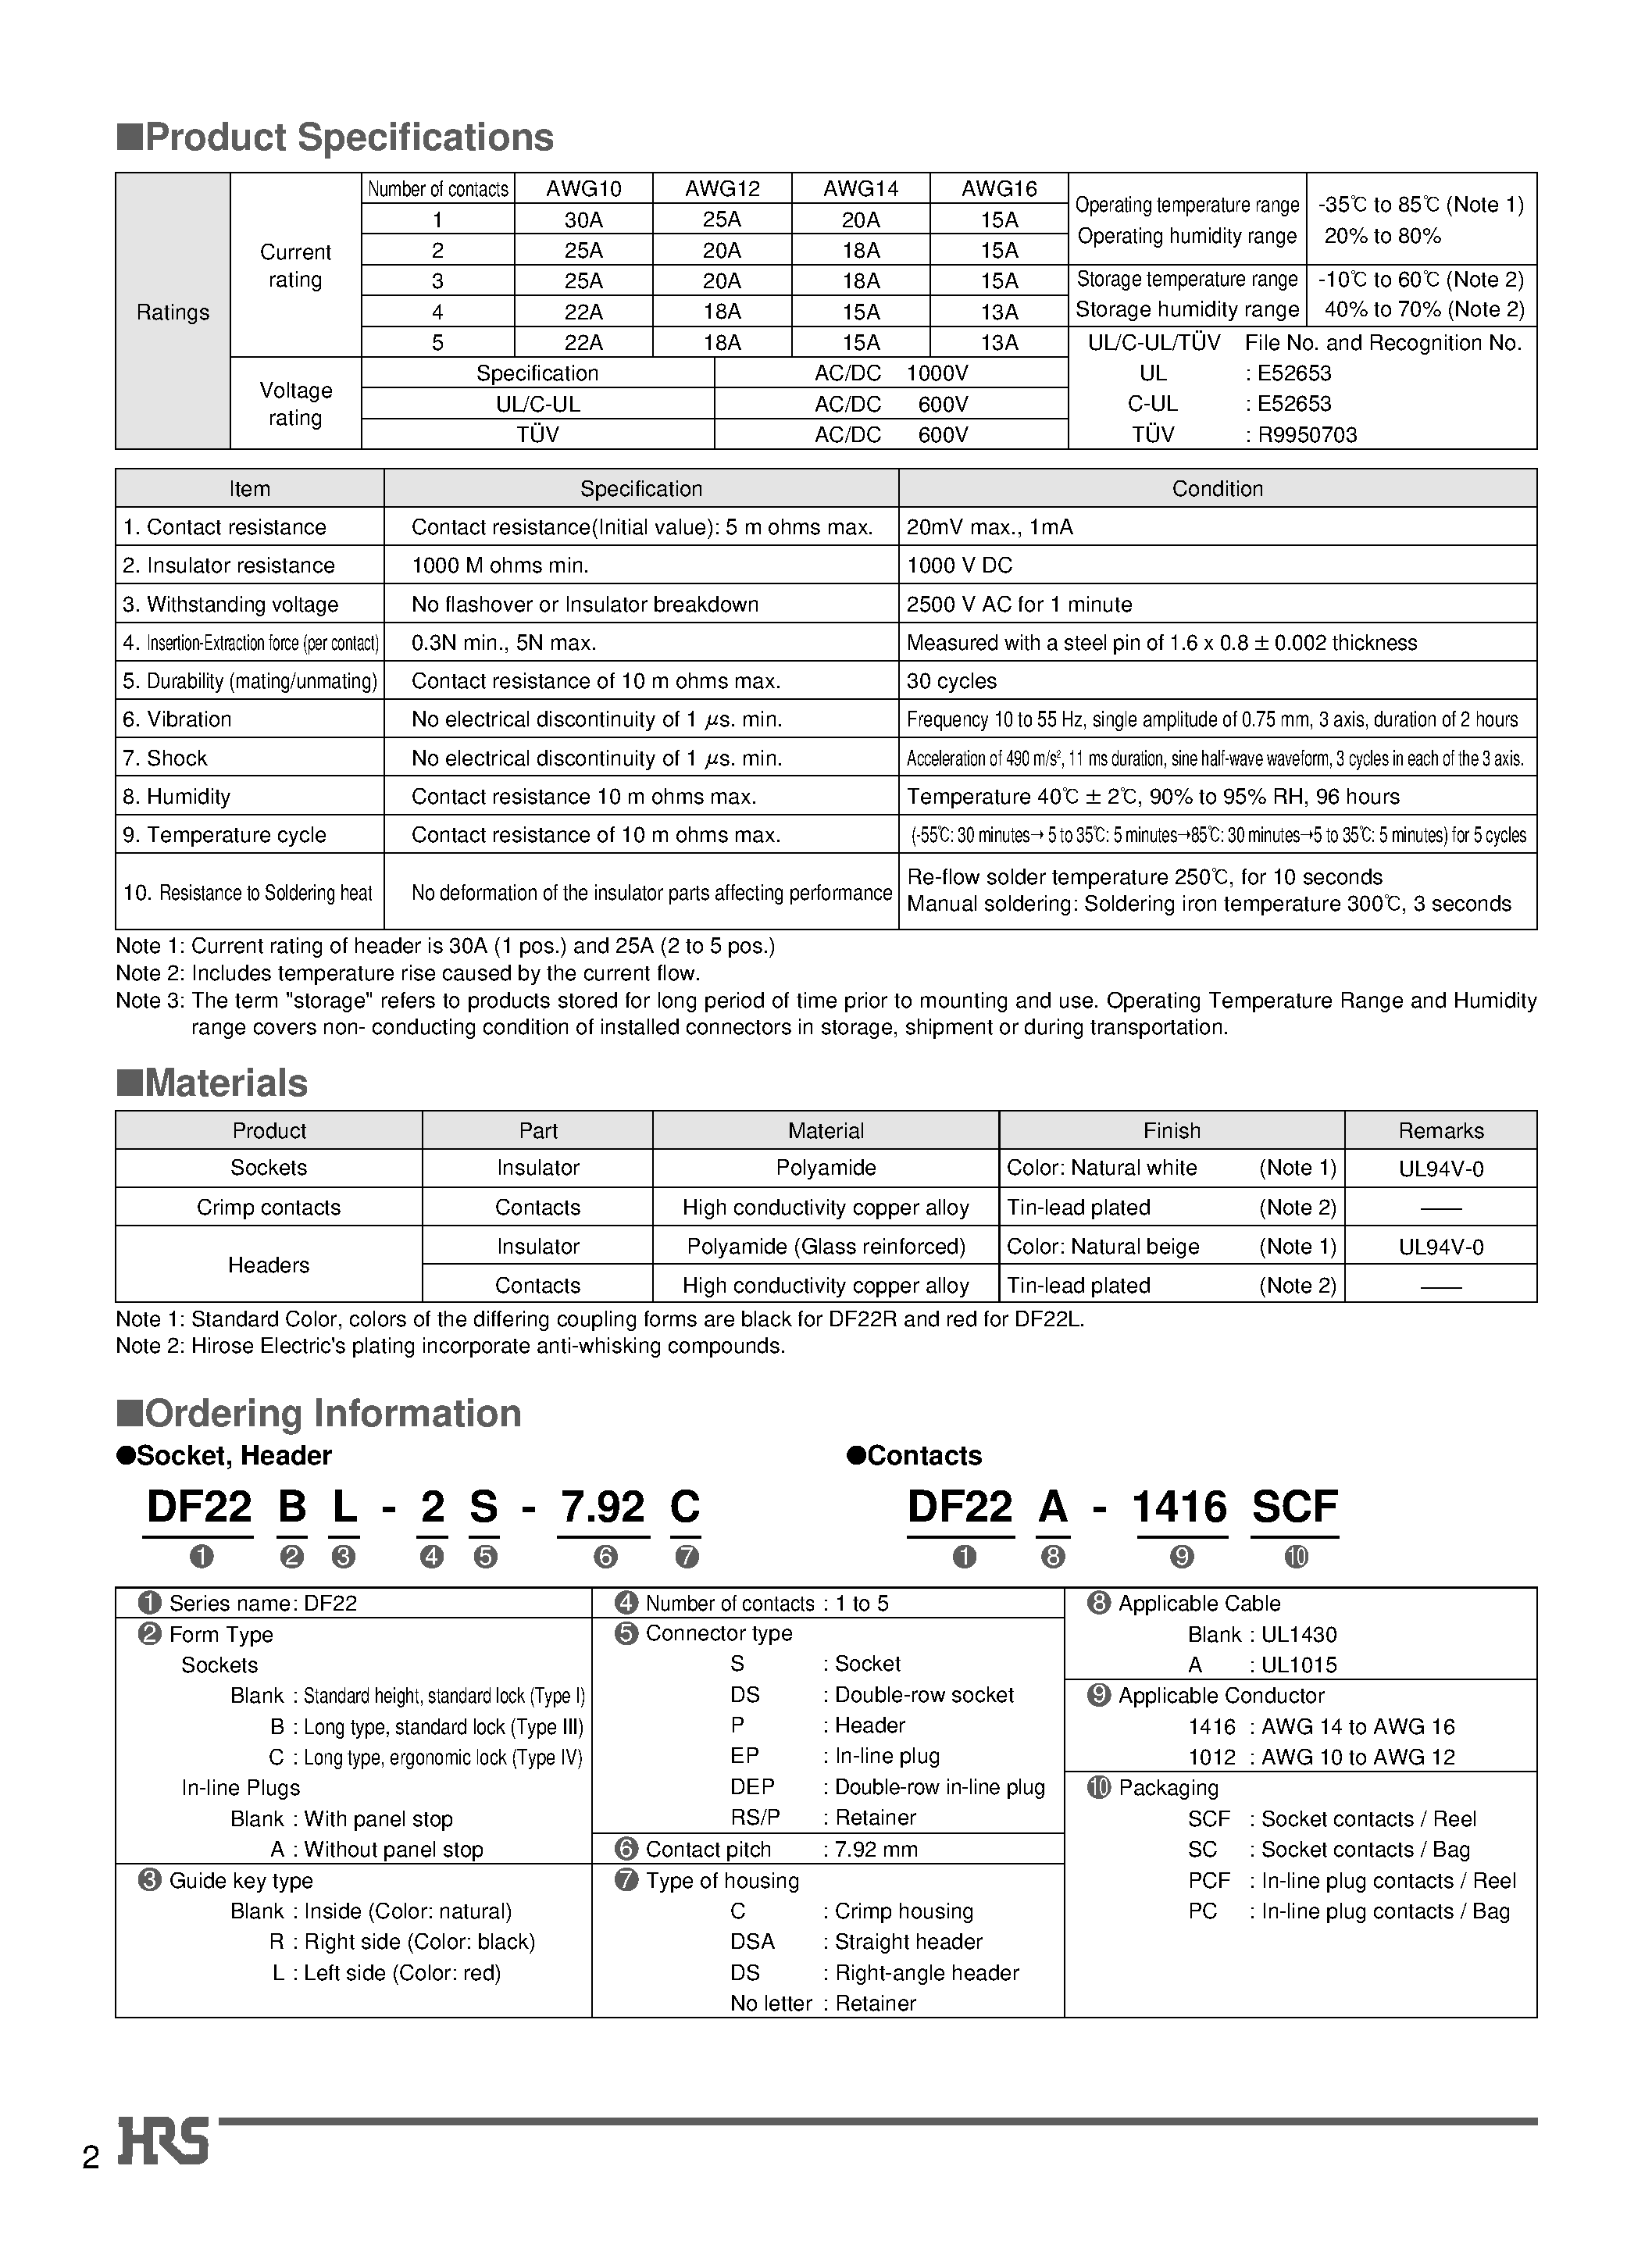 Datasheet DF22-2P-7.92C - 7.92 mm Contact Pitch/ High-Current Connectors for Internal Power Supplies (UL/ C-UL and TUV Listed) page 2